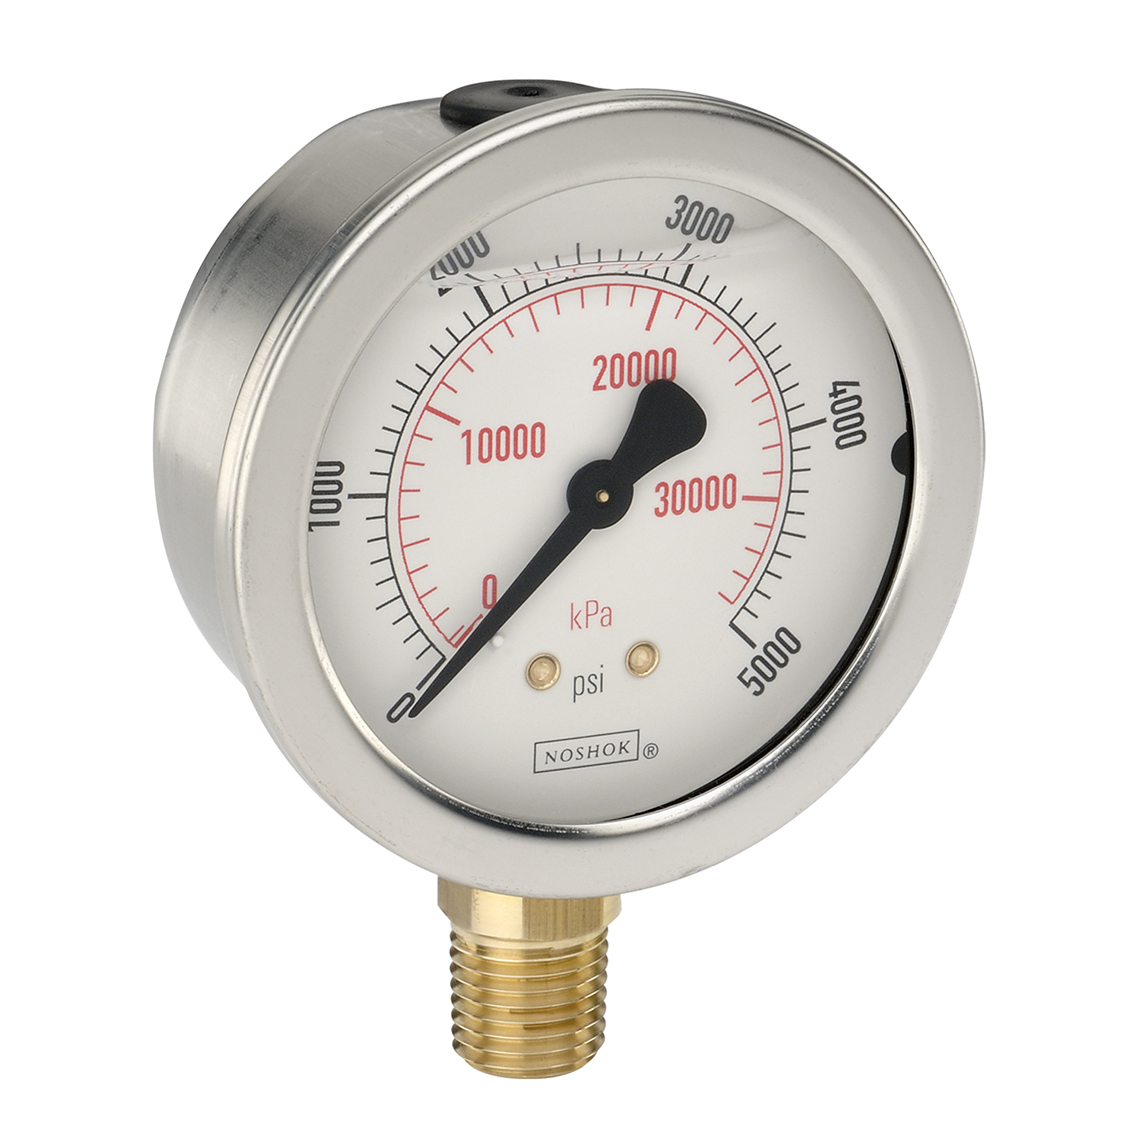 25-901-3000-psi/bar-MIP 900 Series ABS and Stainless Steel Liquid Filled Pressure Gauges